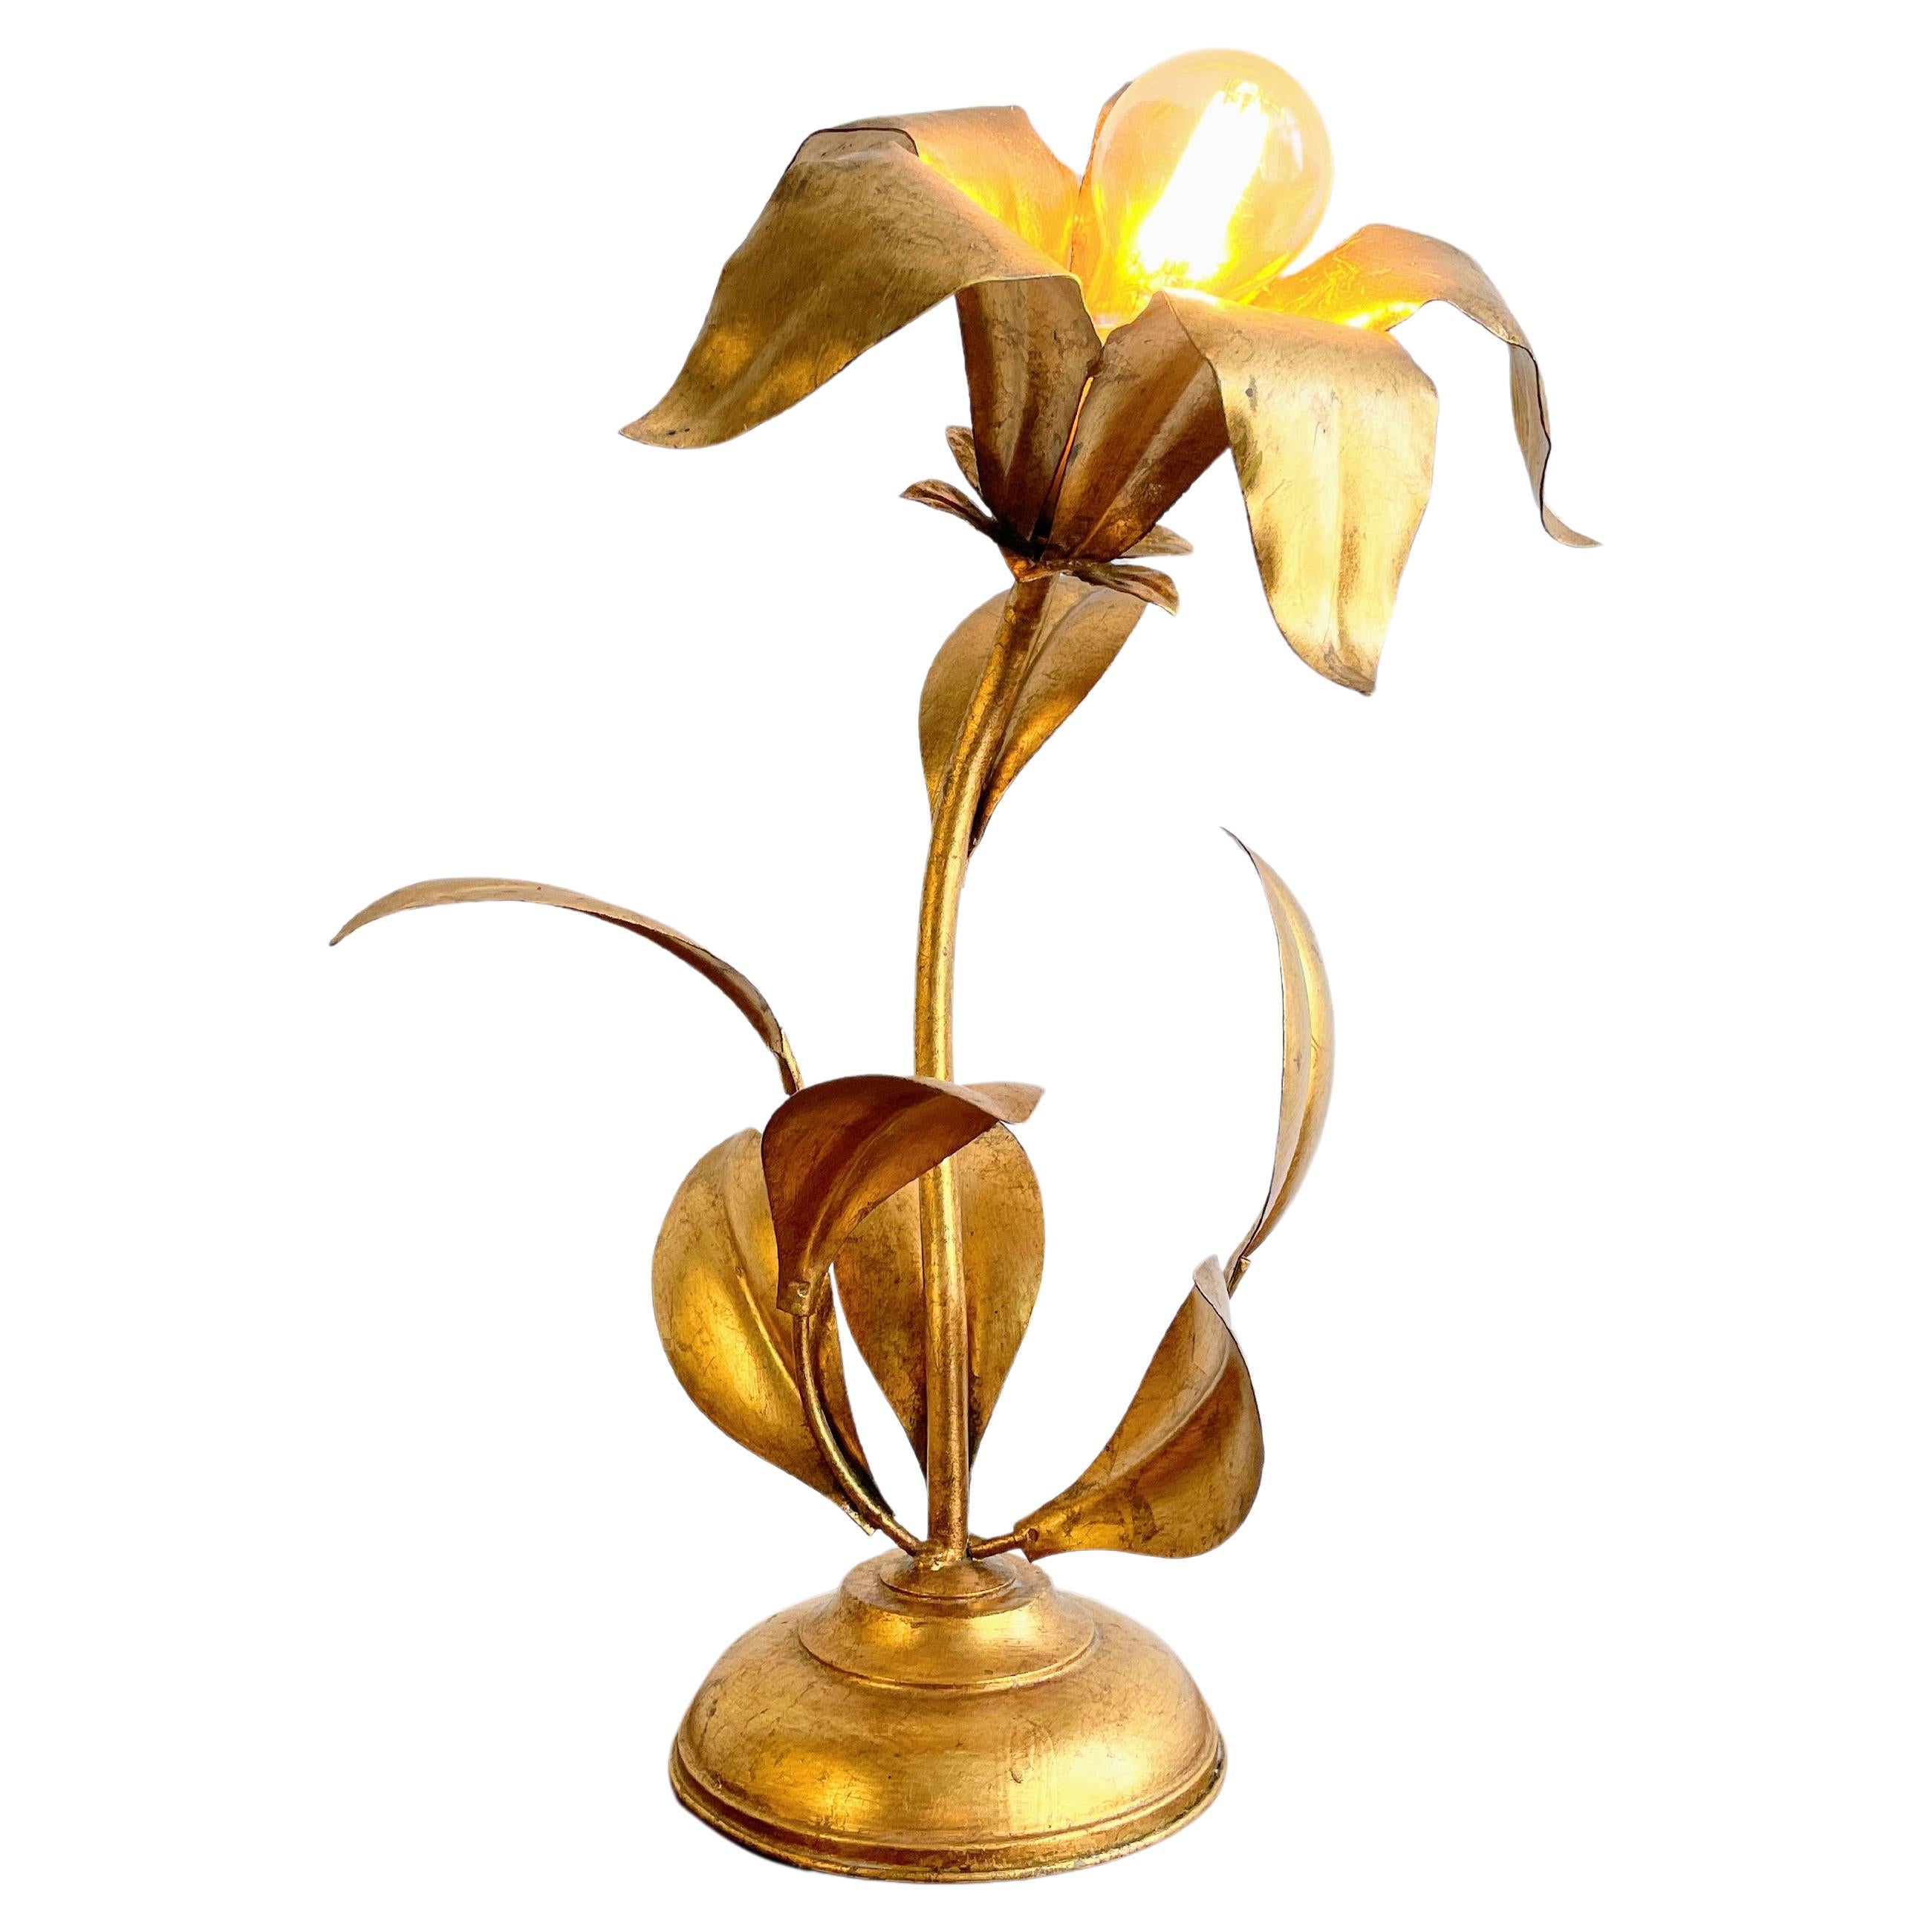 Hollywood Regency Style Flower-Shaped Table Lamp in the style of Koegl, gold